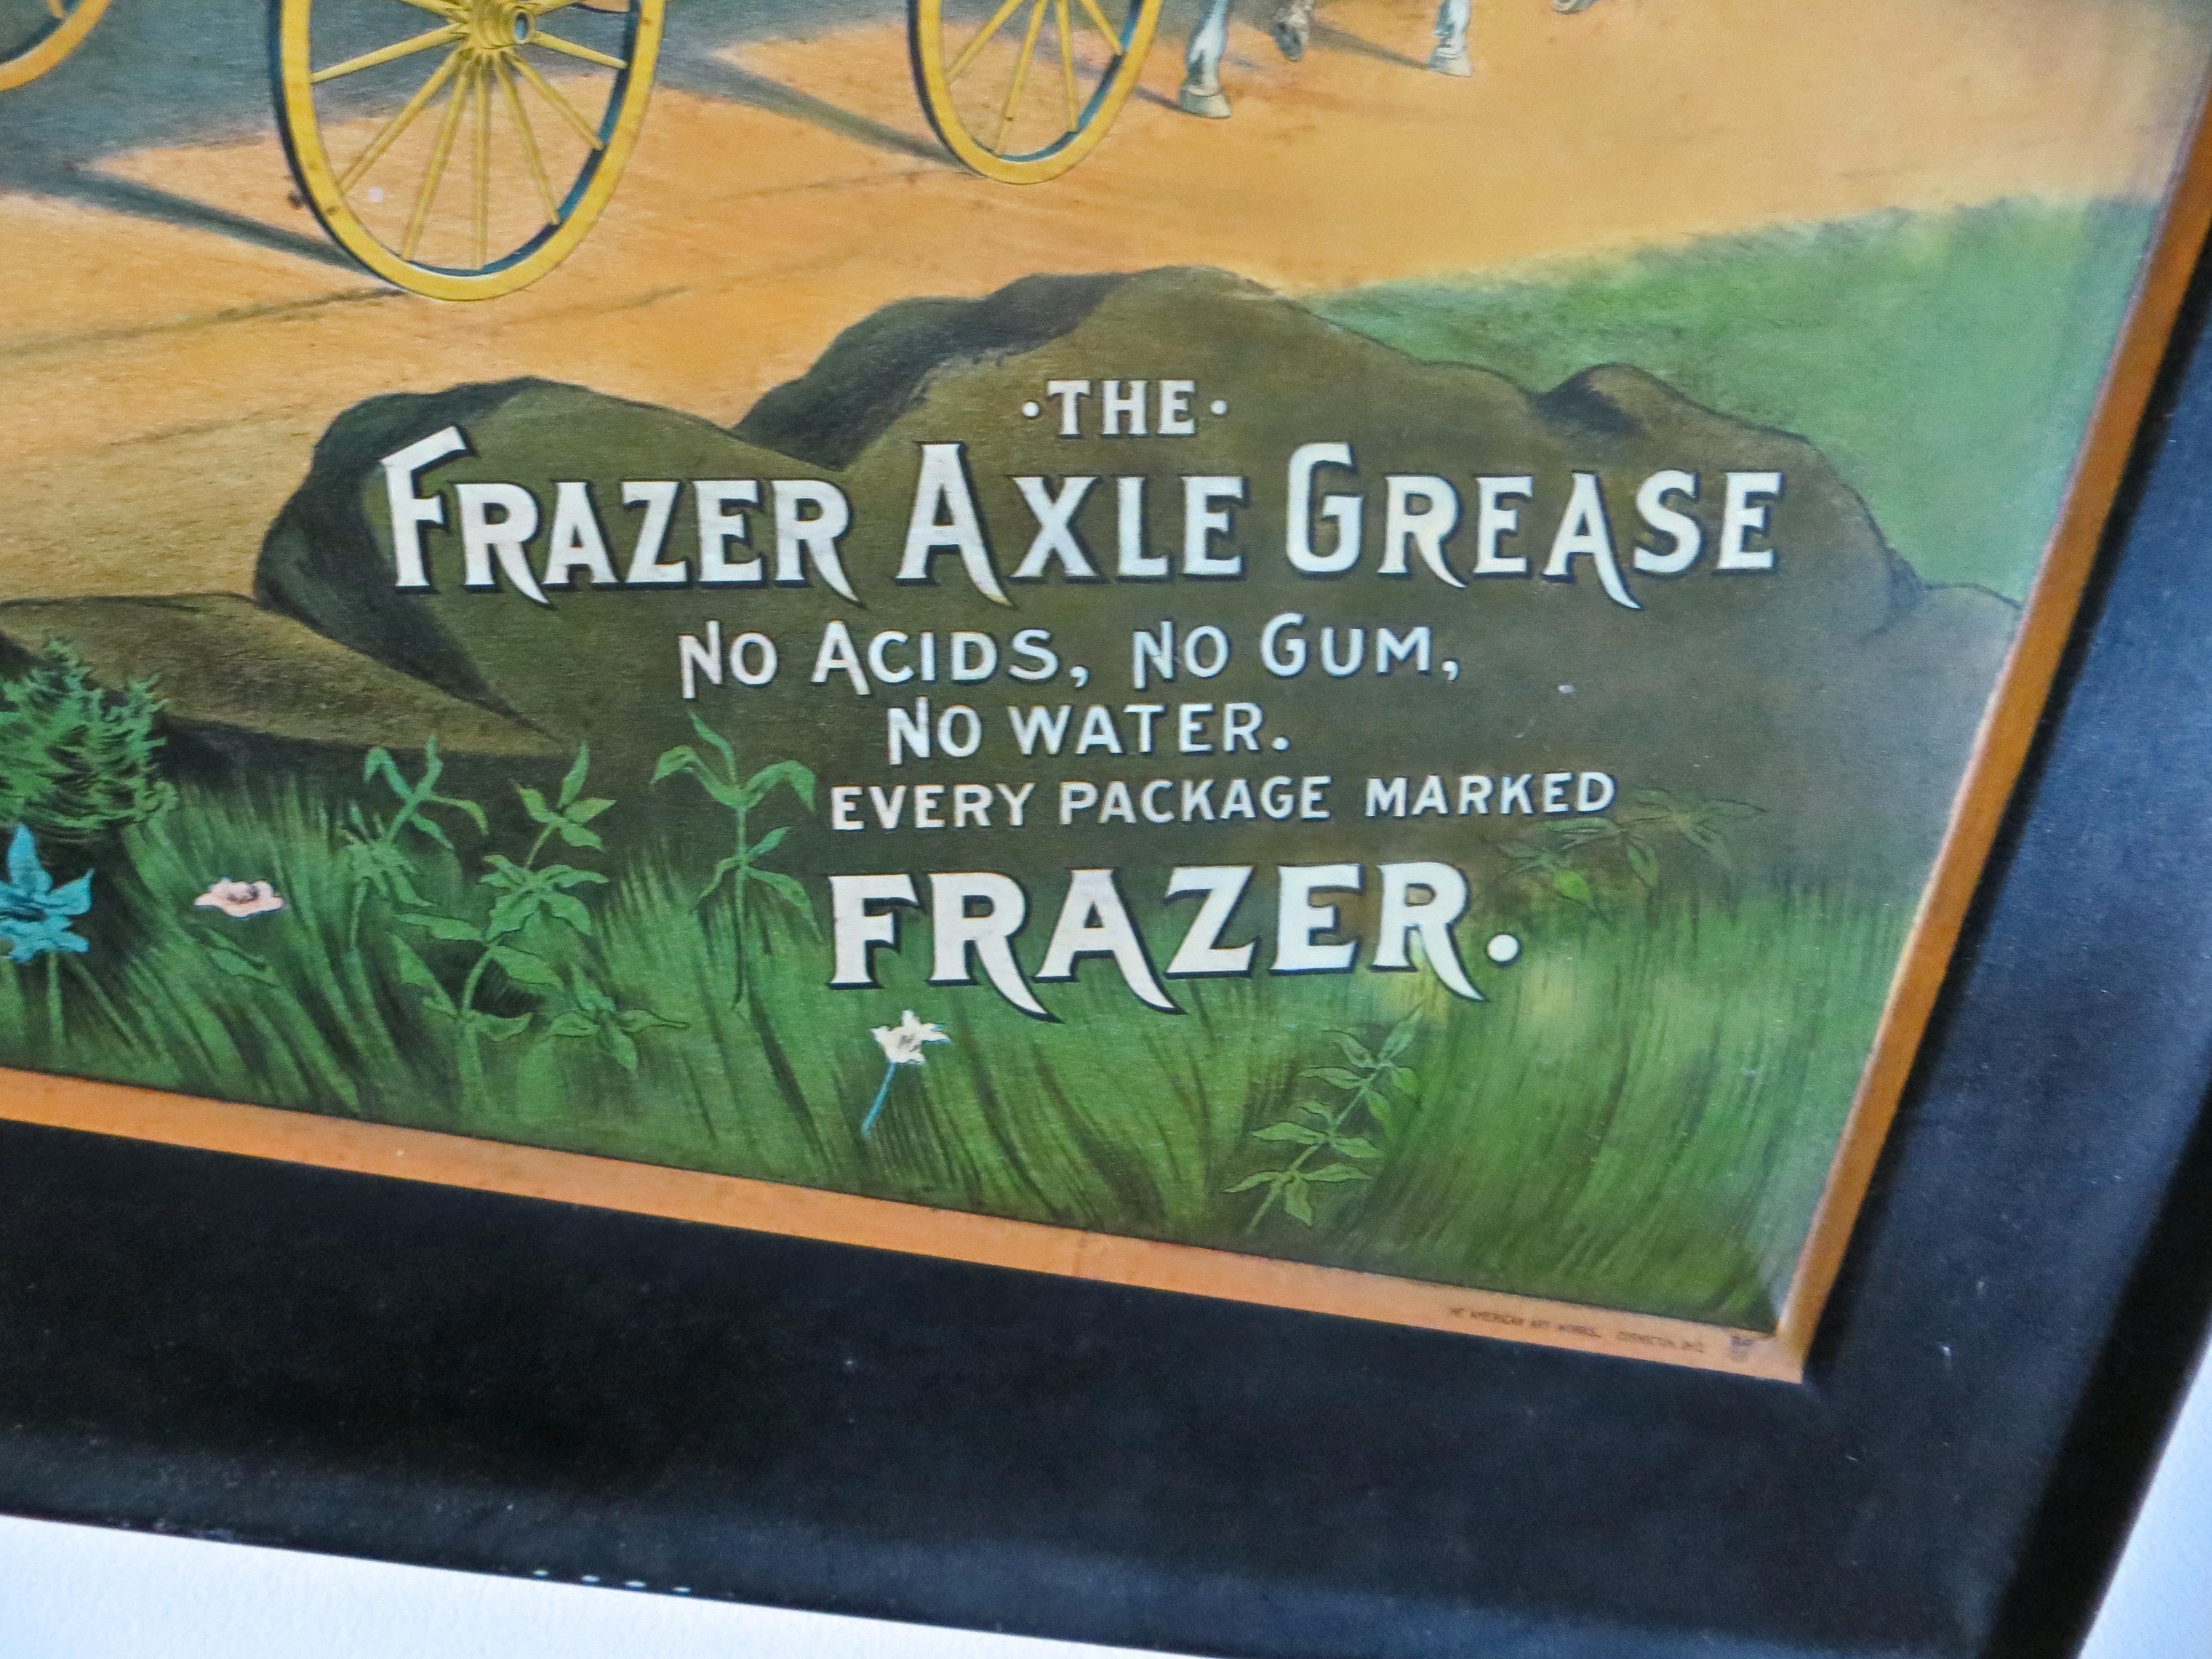 Rare piece of Americana; an advertising item that would have been hanging in a general store in rural America at the turn of the century, singing the praises and virtues of using Frazer Axle grease, and lamenting what happens when not applied; a